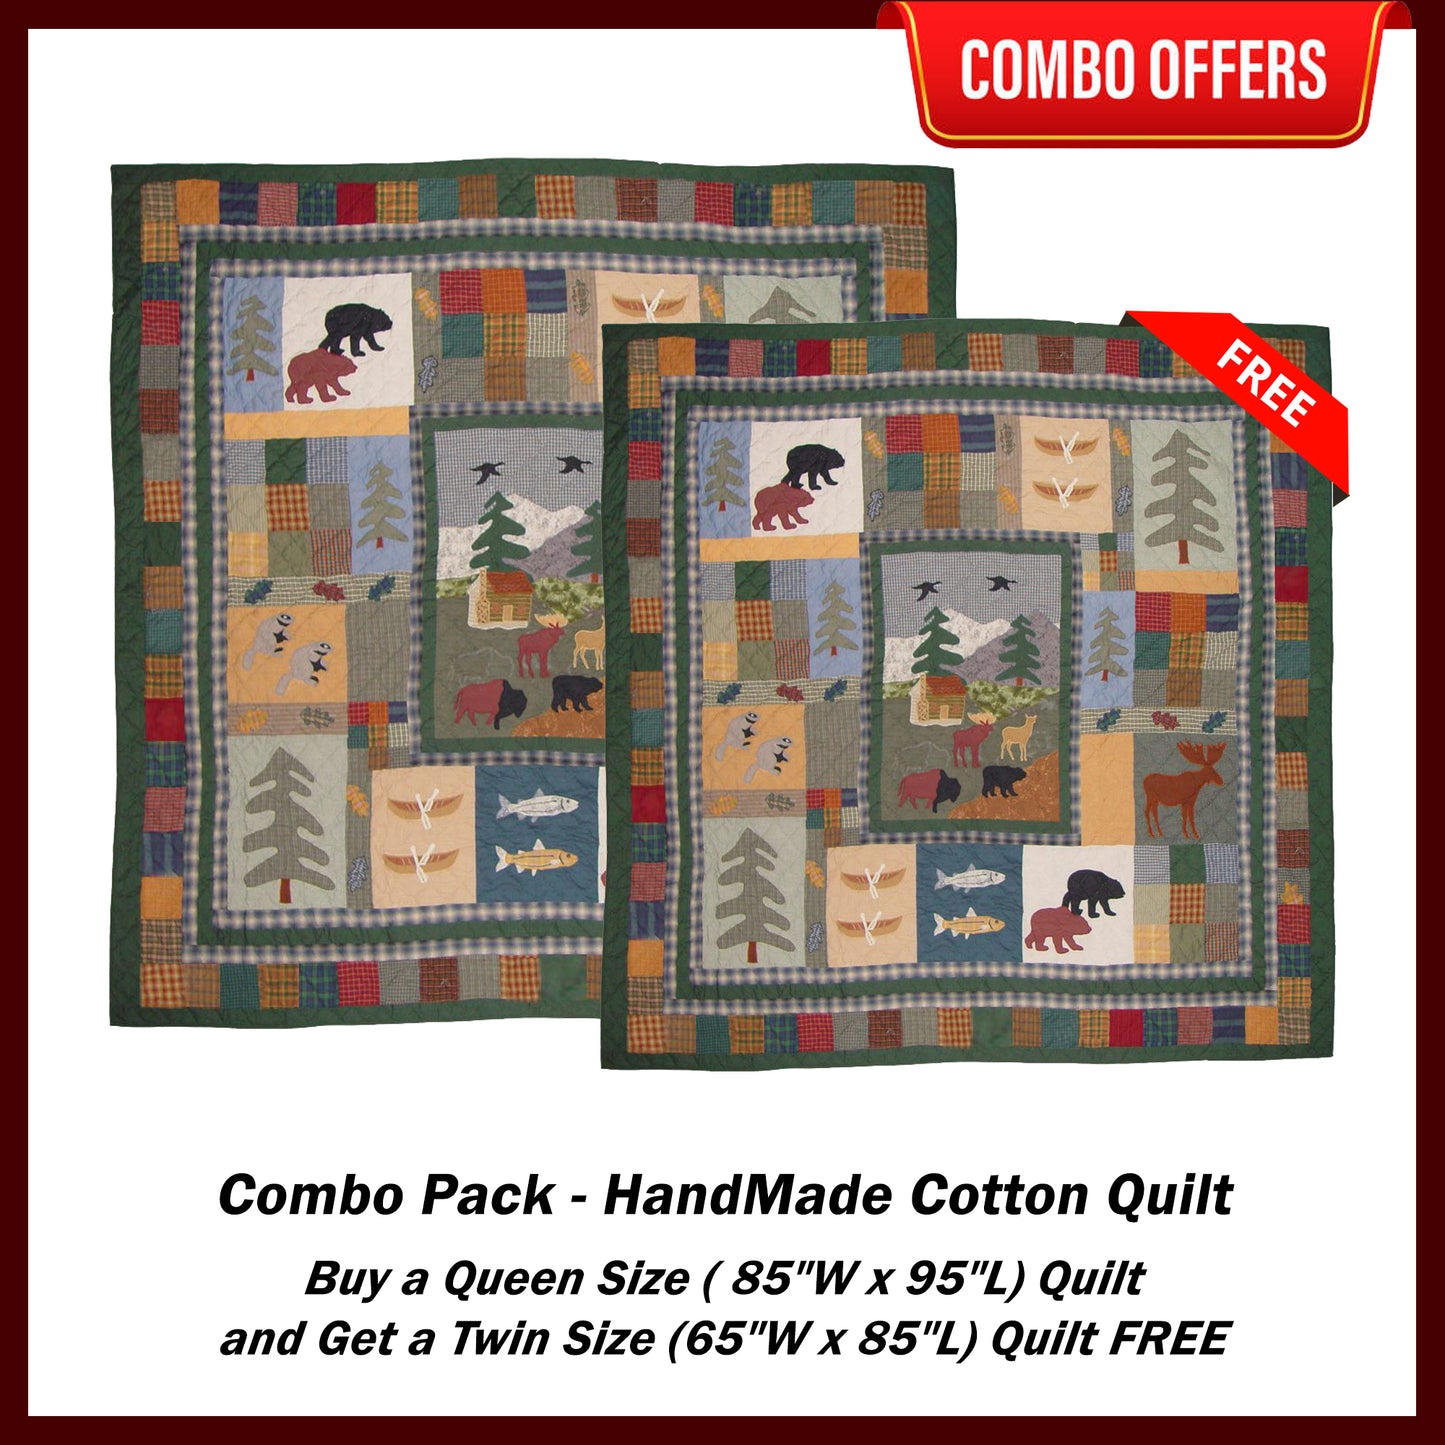 Northwoods Walk Handmade Cotton Quilt - Buy a King Size (or) Queen Size Quilt and Get a Twin Size Quilt FREE